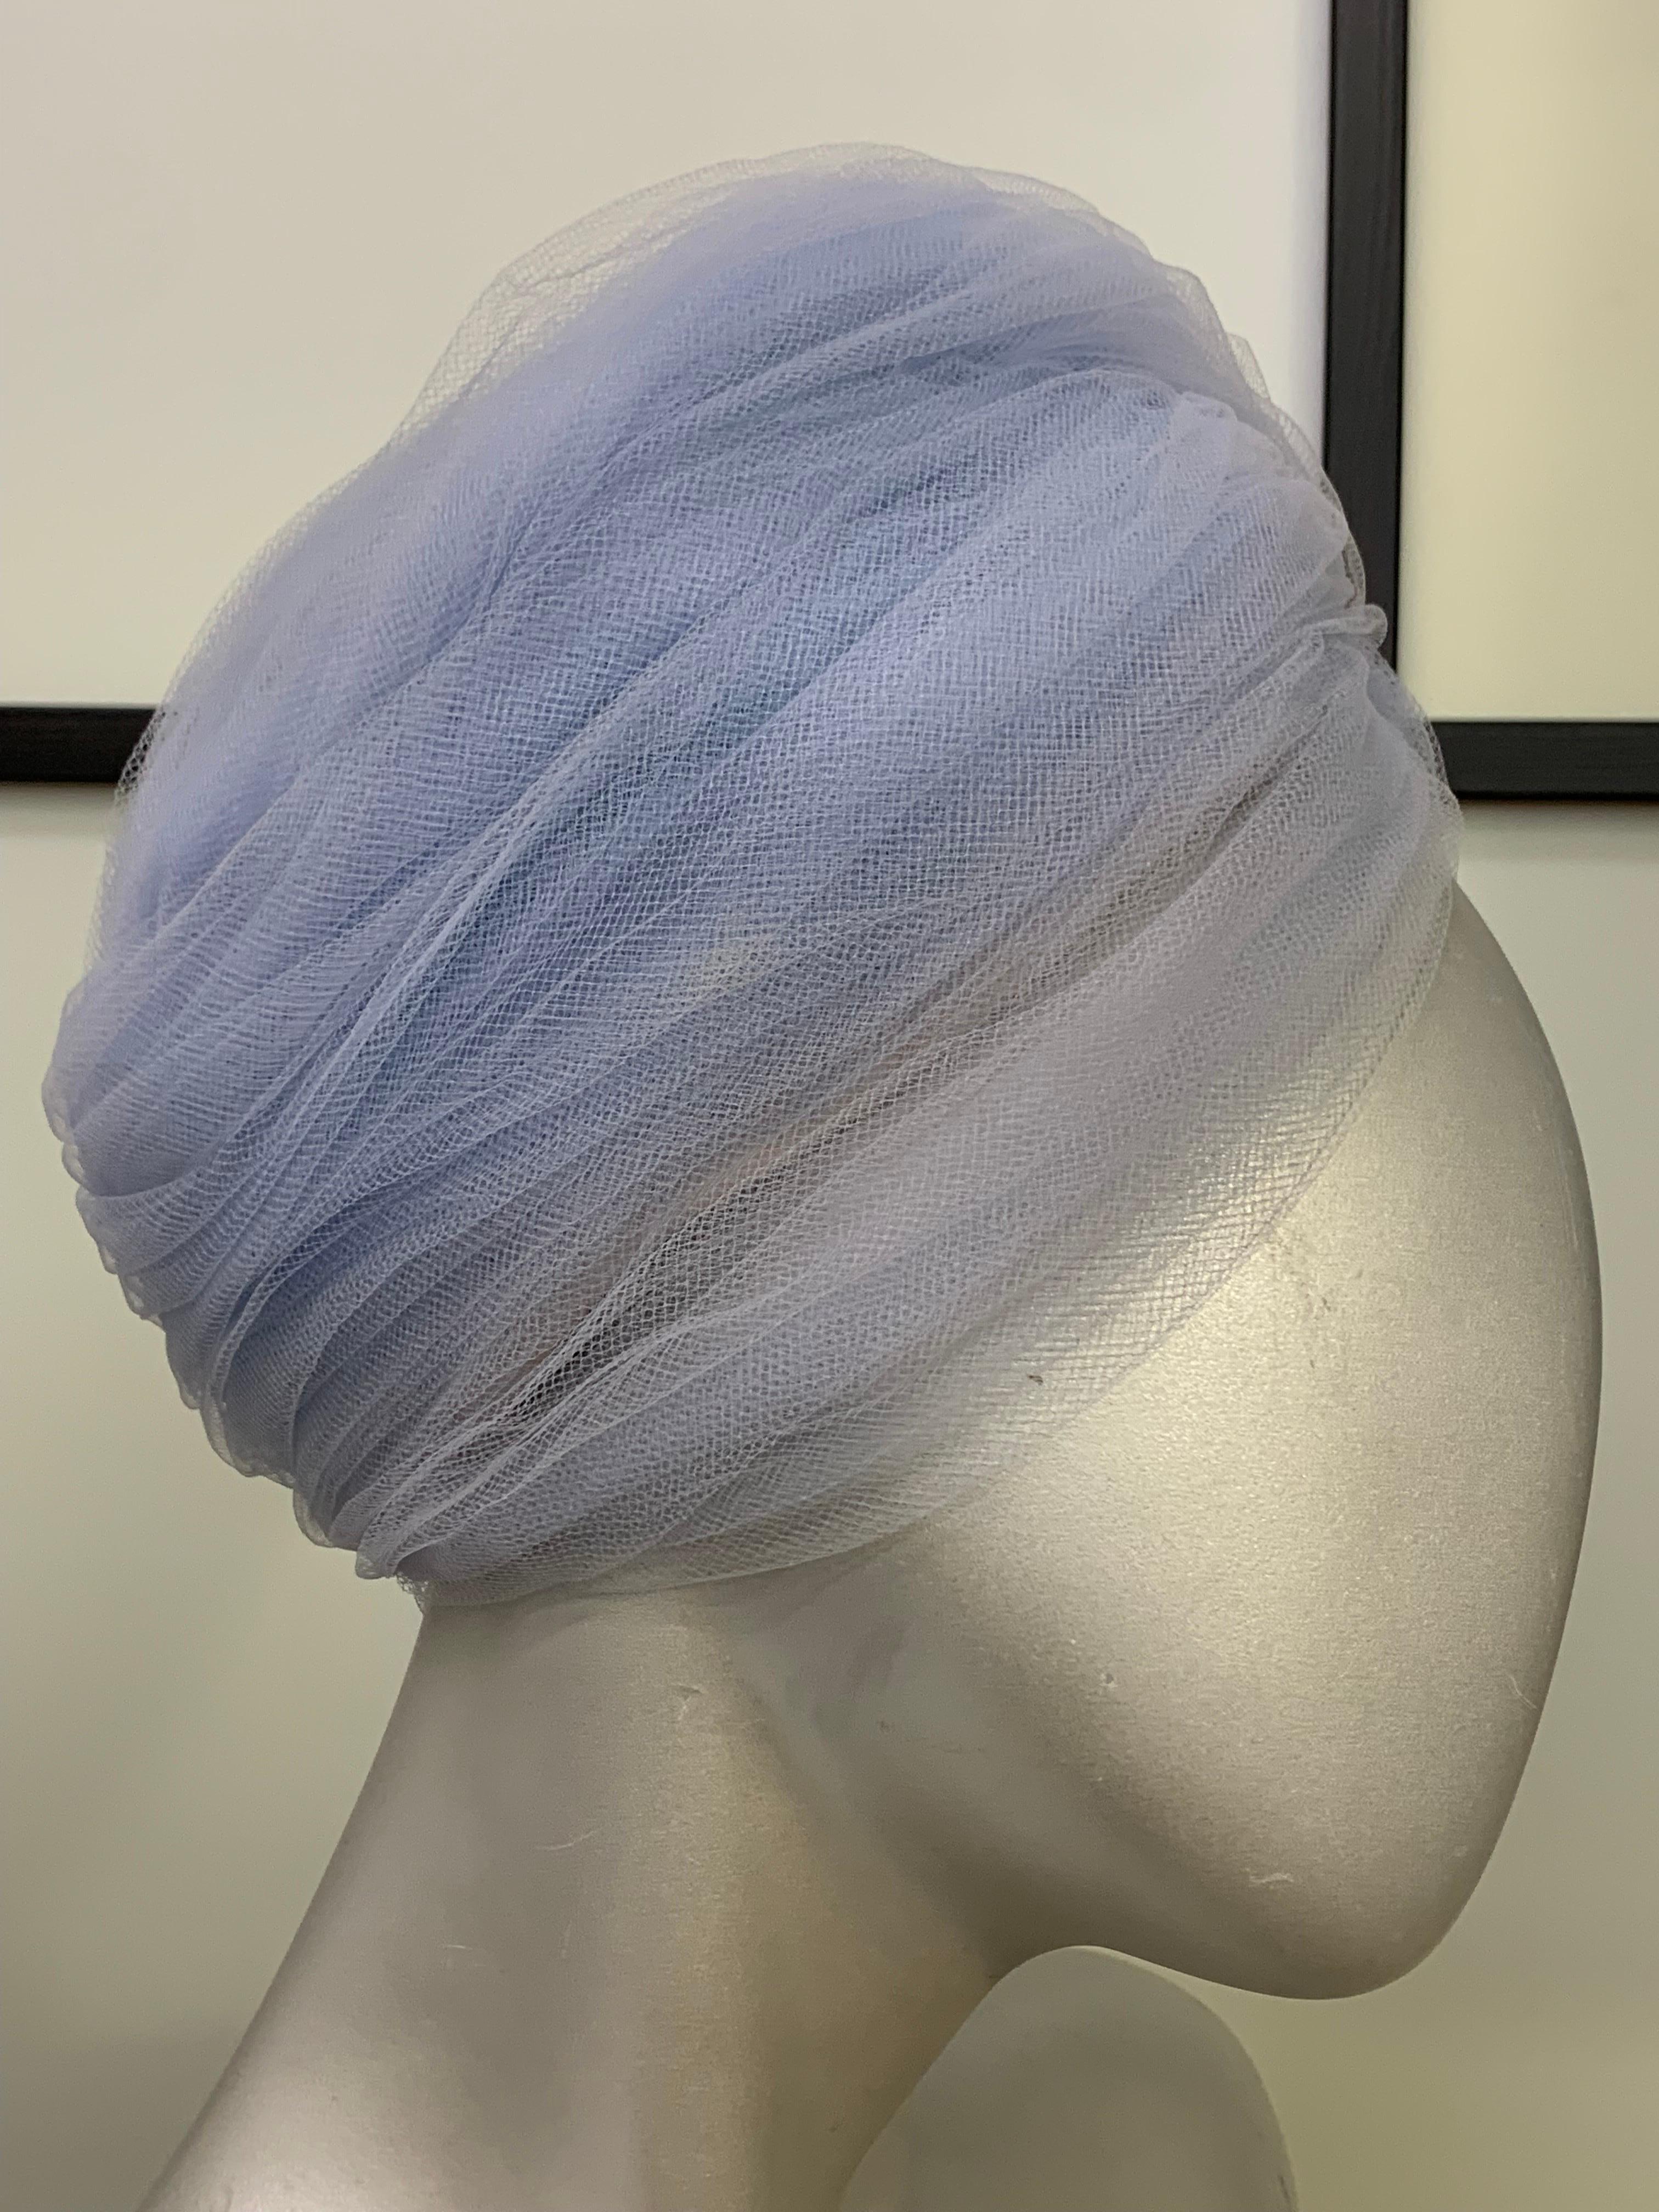 1960s Christian Dior Baby Blue Tulle Peaked Bubble Turban Hat:  A dramatic and stylish hat to be worn toward back of head with the hairline peeking out at front center, this is a high silhouette bubble shape. Gorgeous!  Size S-M. 